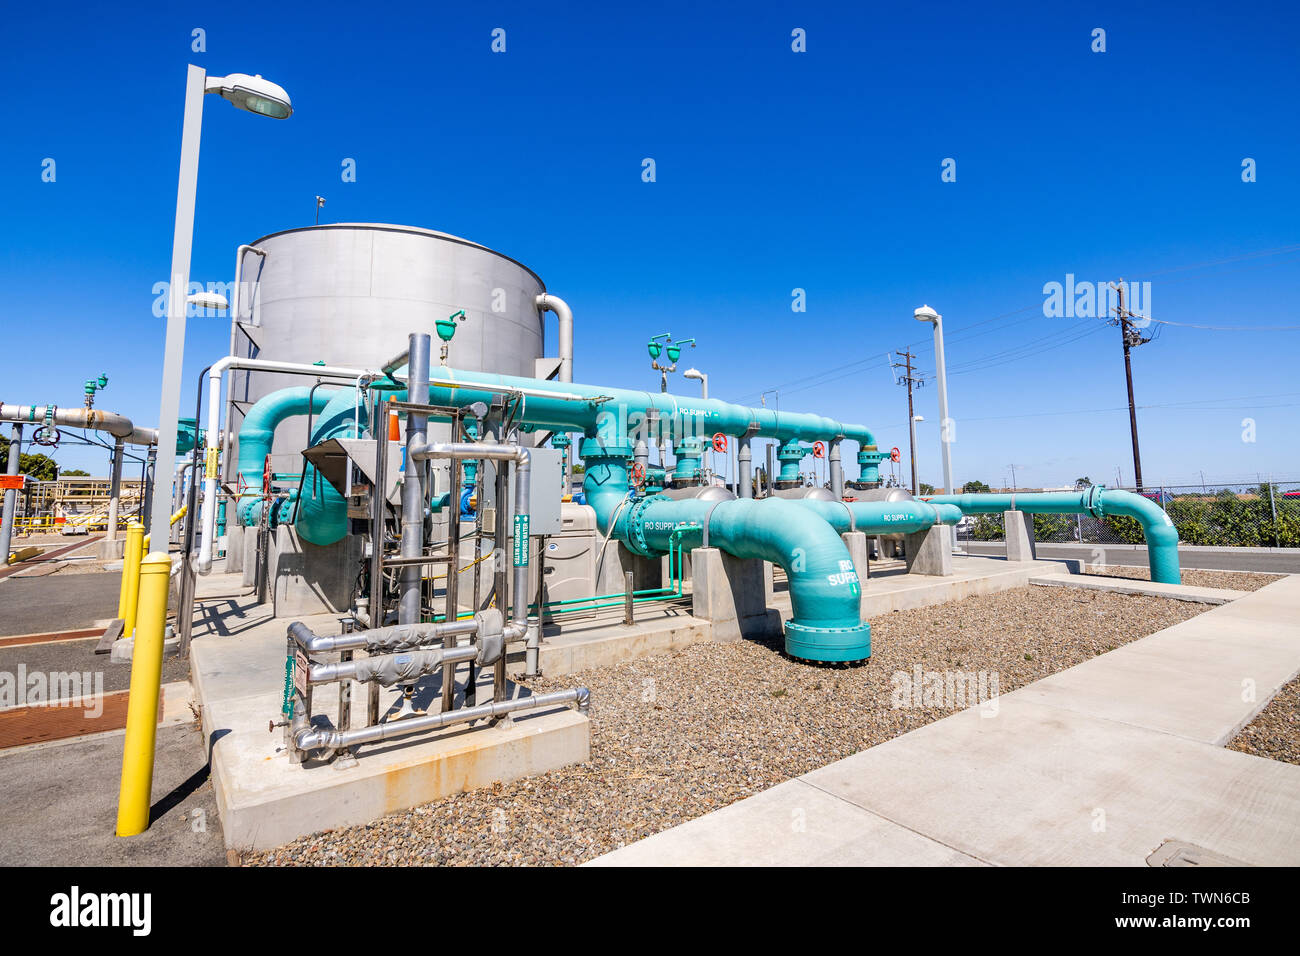 June 20, 2019 San Jose / CA / USA - Storage tank at Silicon Valley Advanced Water Purification Center located in South San Francisco bay area; part of Stock Photo